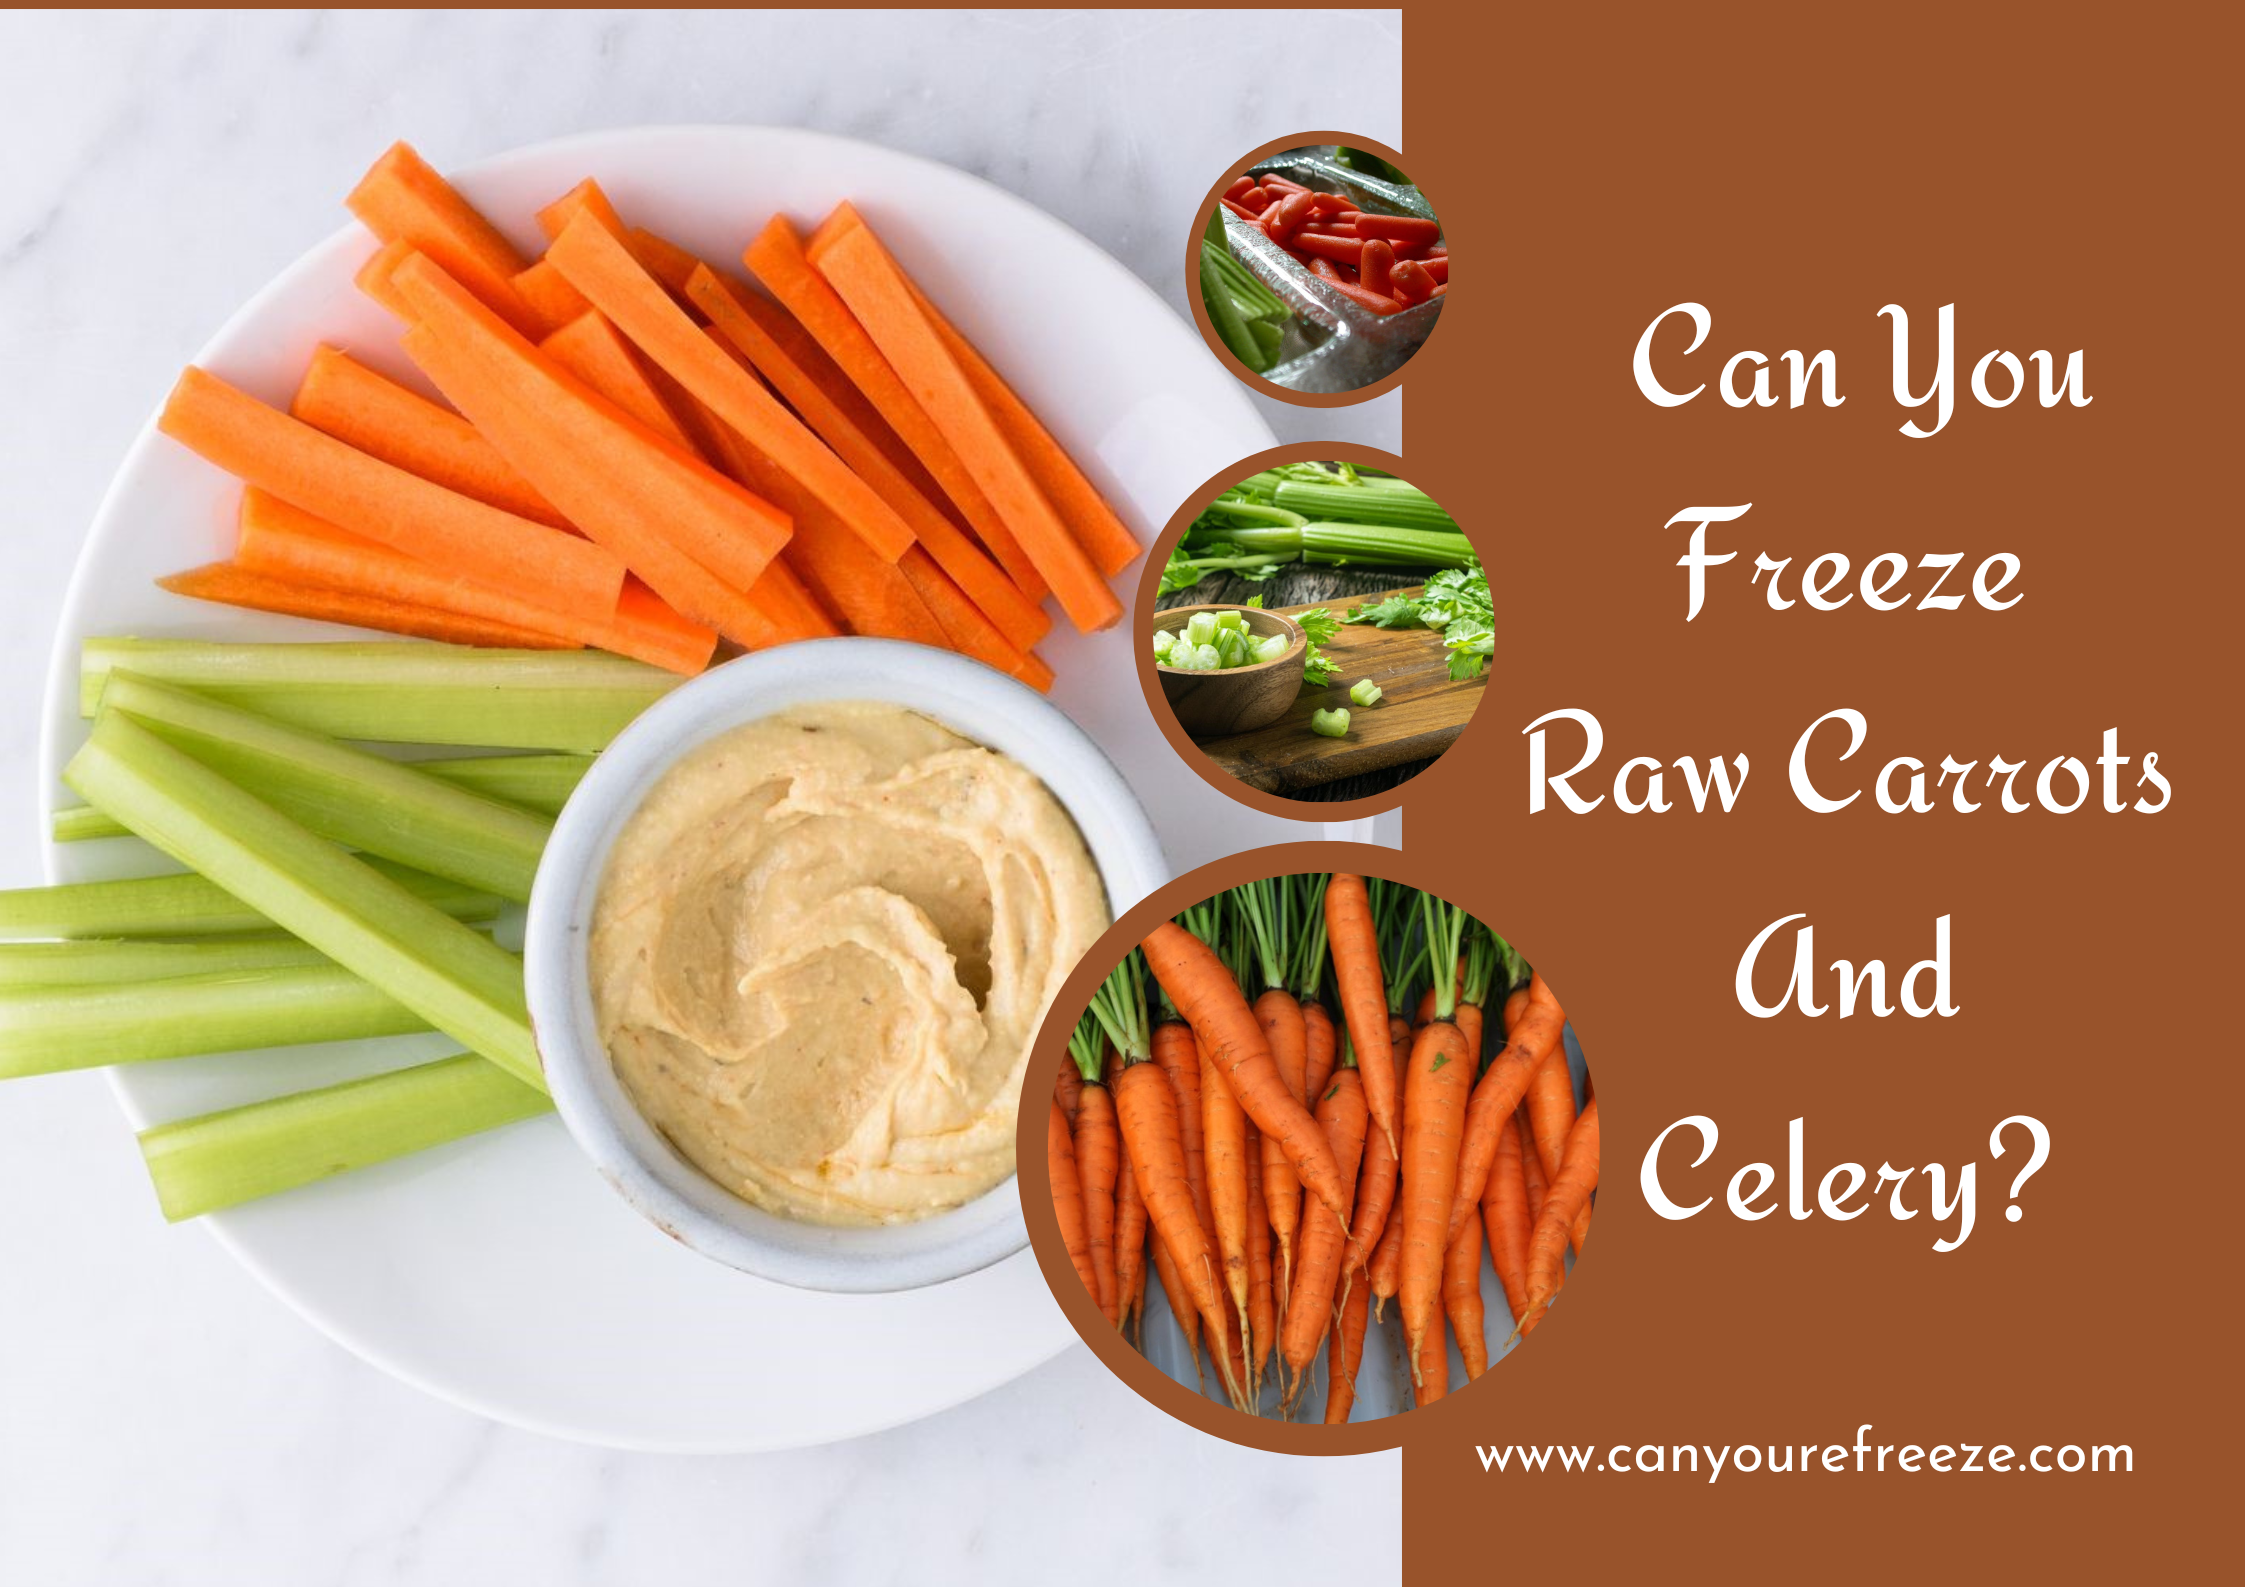 Can You Freeze Raw Carrots And Celery